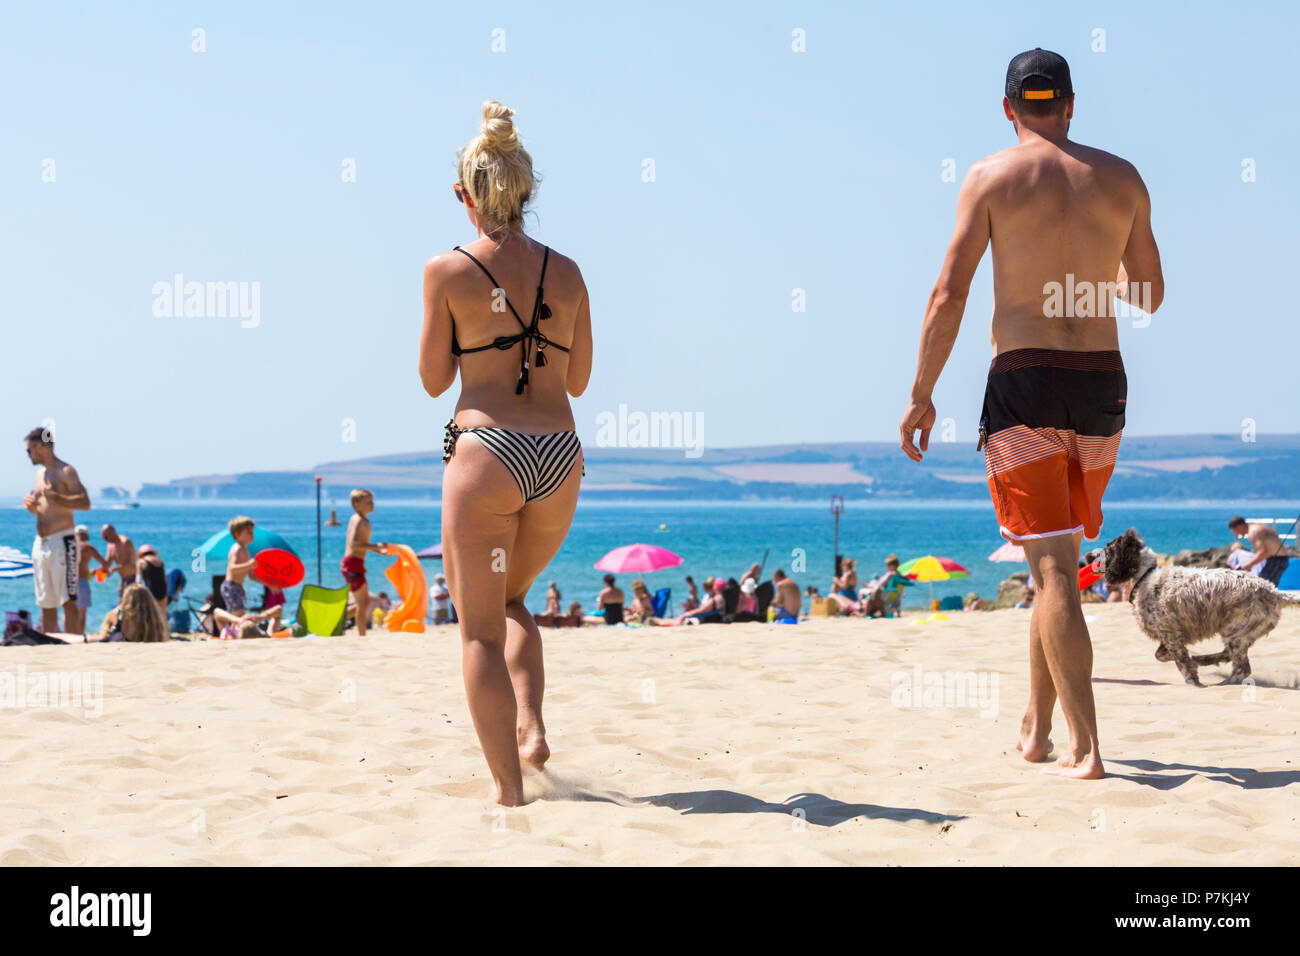 Branksome Dene, Poole, Dorset, UK. 7th July 2018. UK weather: another hot sunny day as the heatwave continues and thousands of sunseekers head to the  seaside to enjoy the sandy beaches at Poole on the South Coast. Credit: Carolyn Jenkins/Alamy Live News Stock Photo